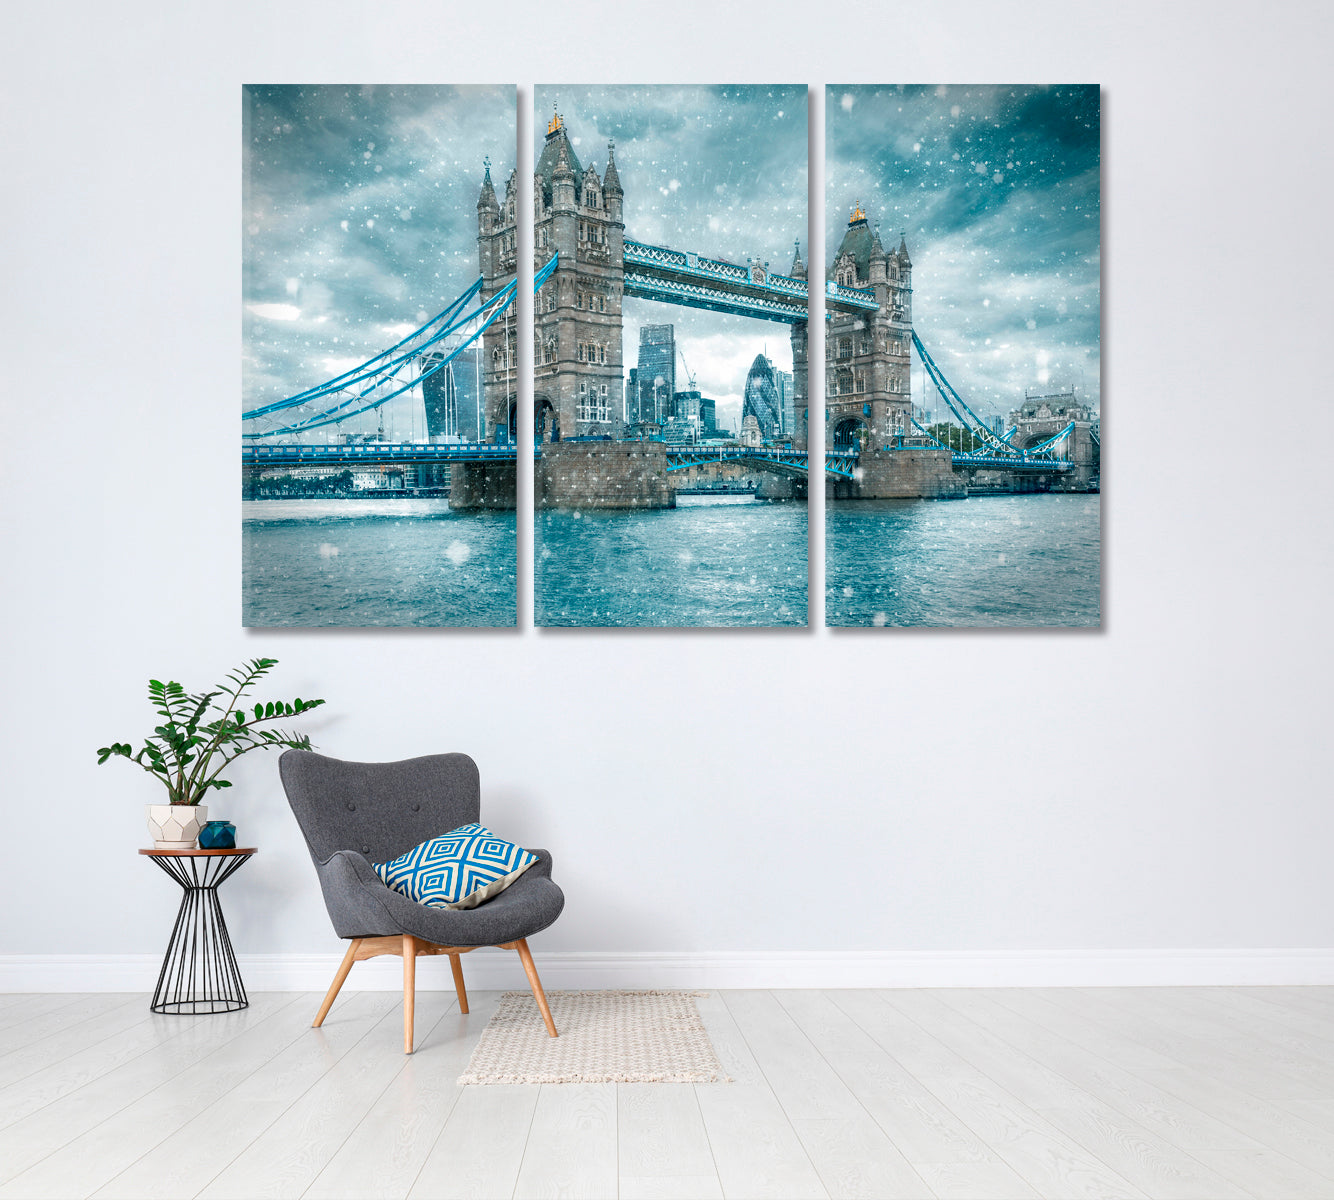 London Tower Bridge in Winter Canvas Print ArtLexy 3 Panels 36"x24" inches 